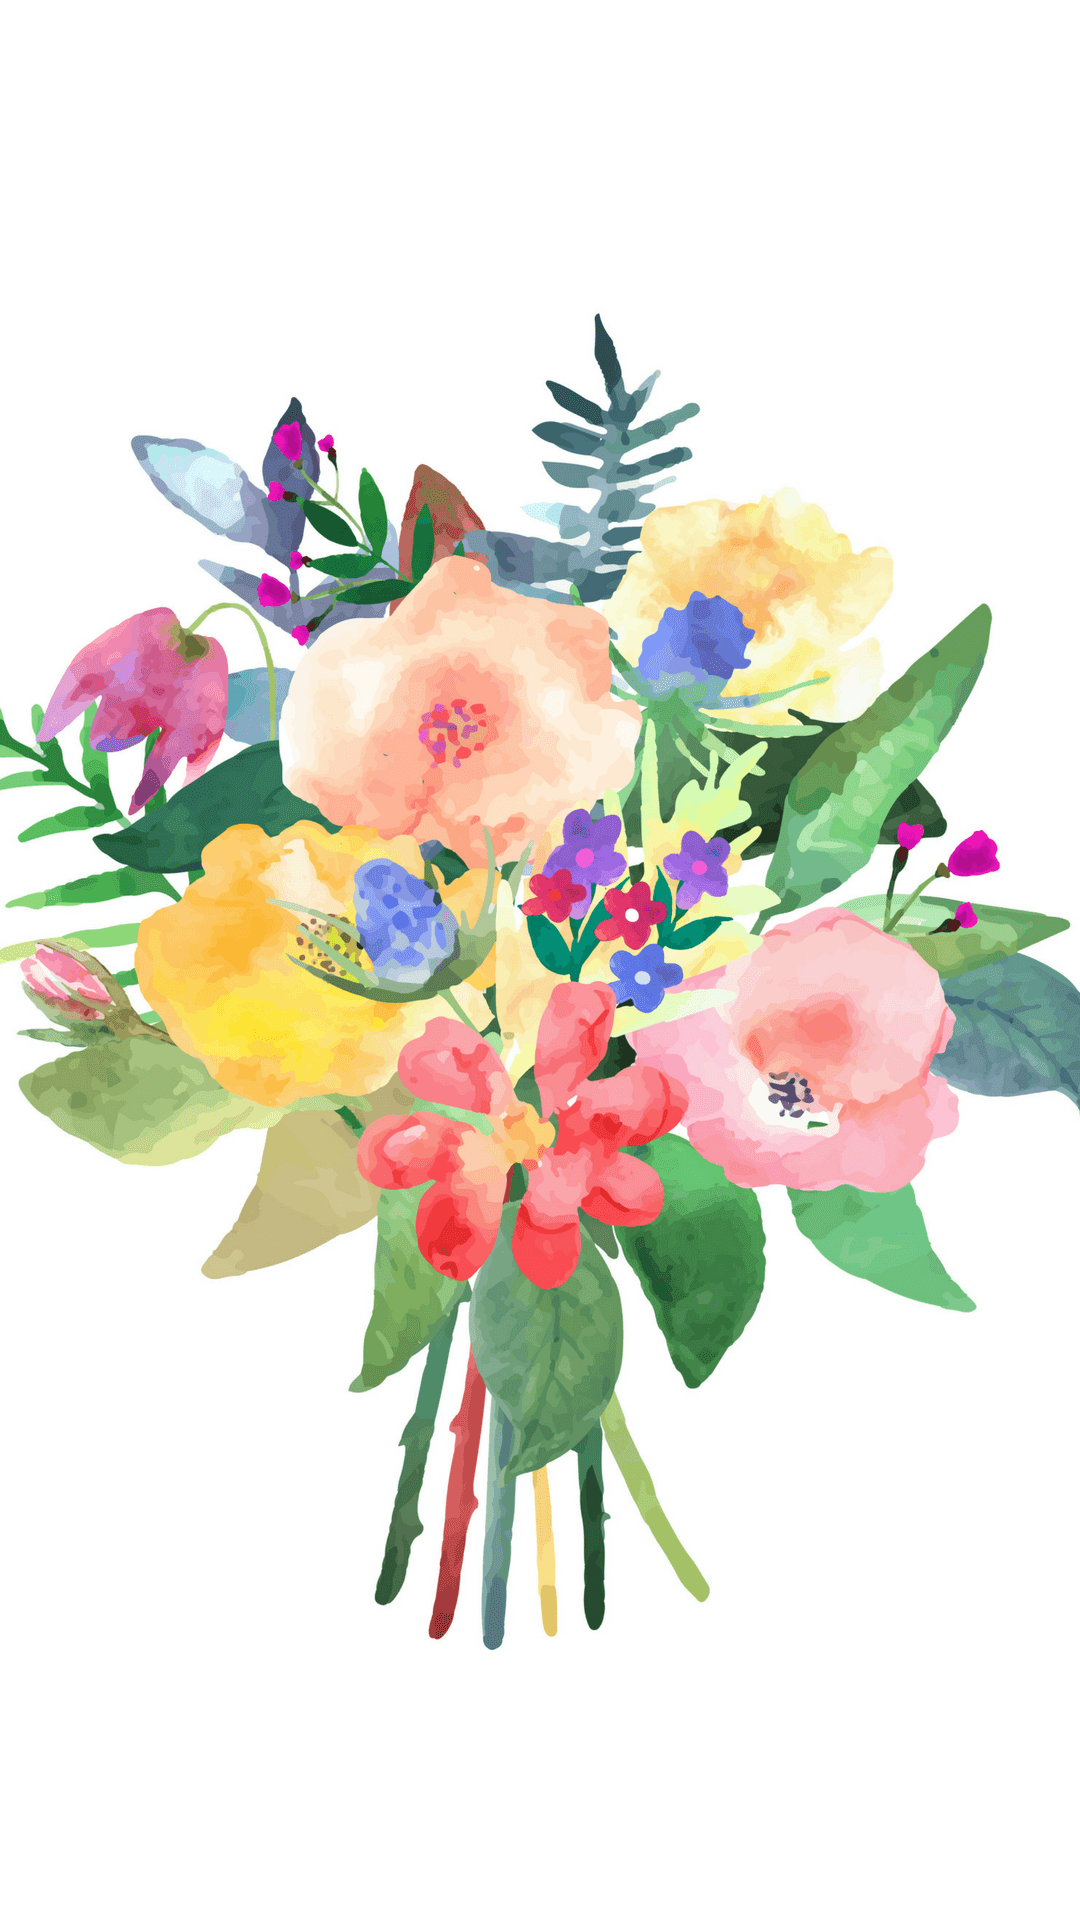 The Friday Five Watercolor Floral Wallpaper 1080x1920